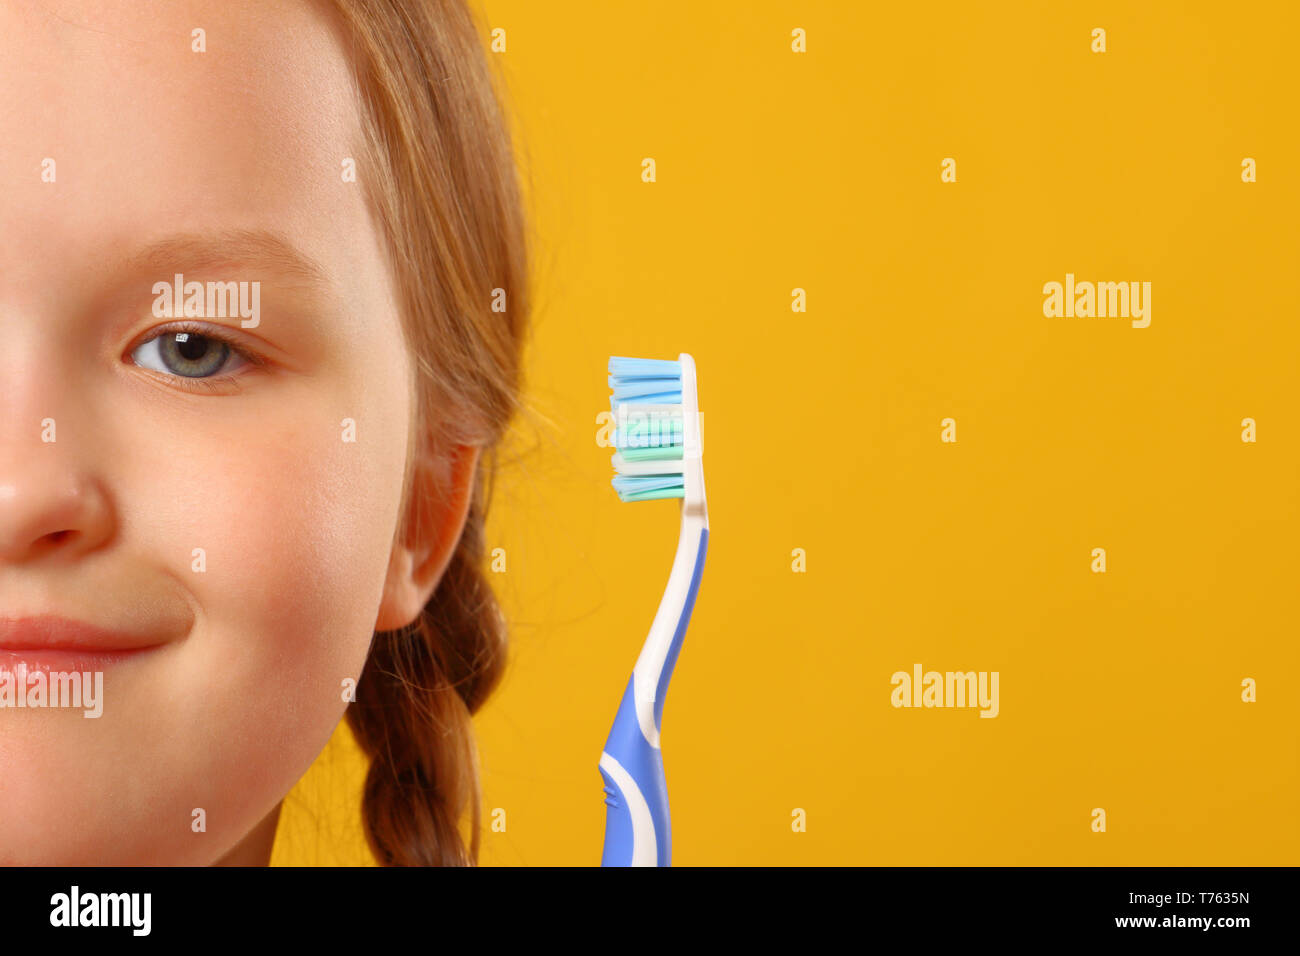 Closeup portrait of little girl's face on yellow background. holding a toothbrush. The concept of daily hygiene. Stock Photo